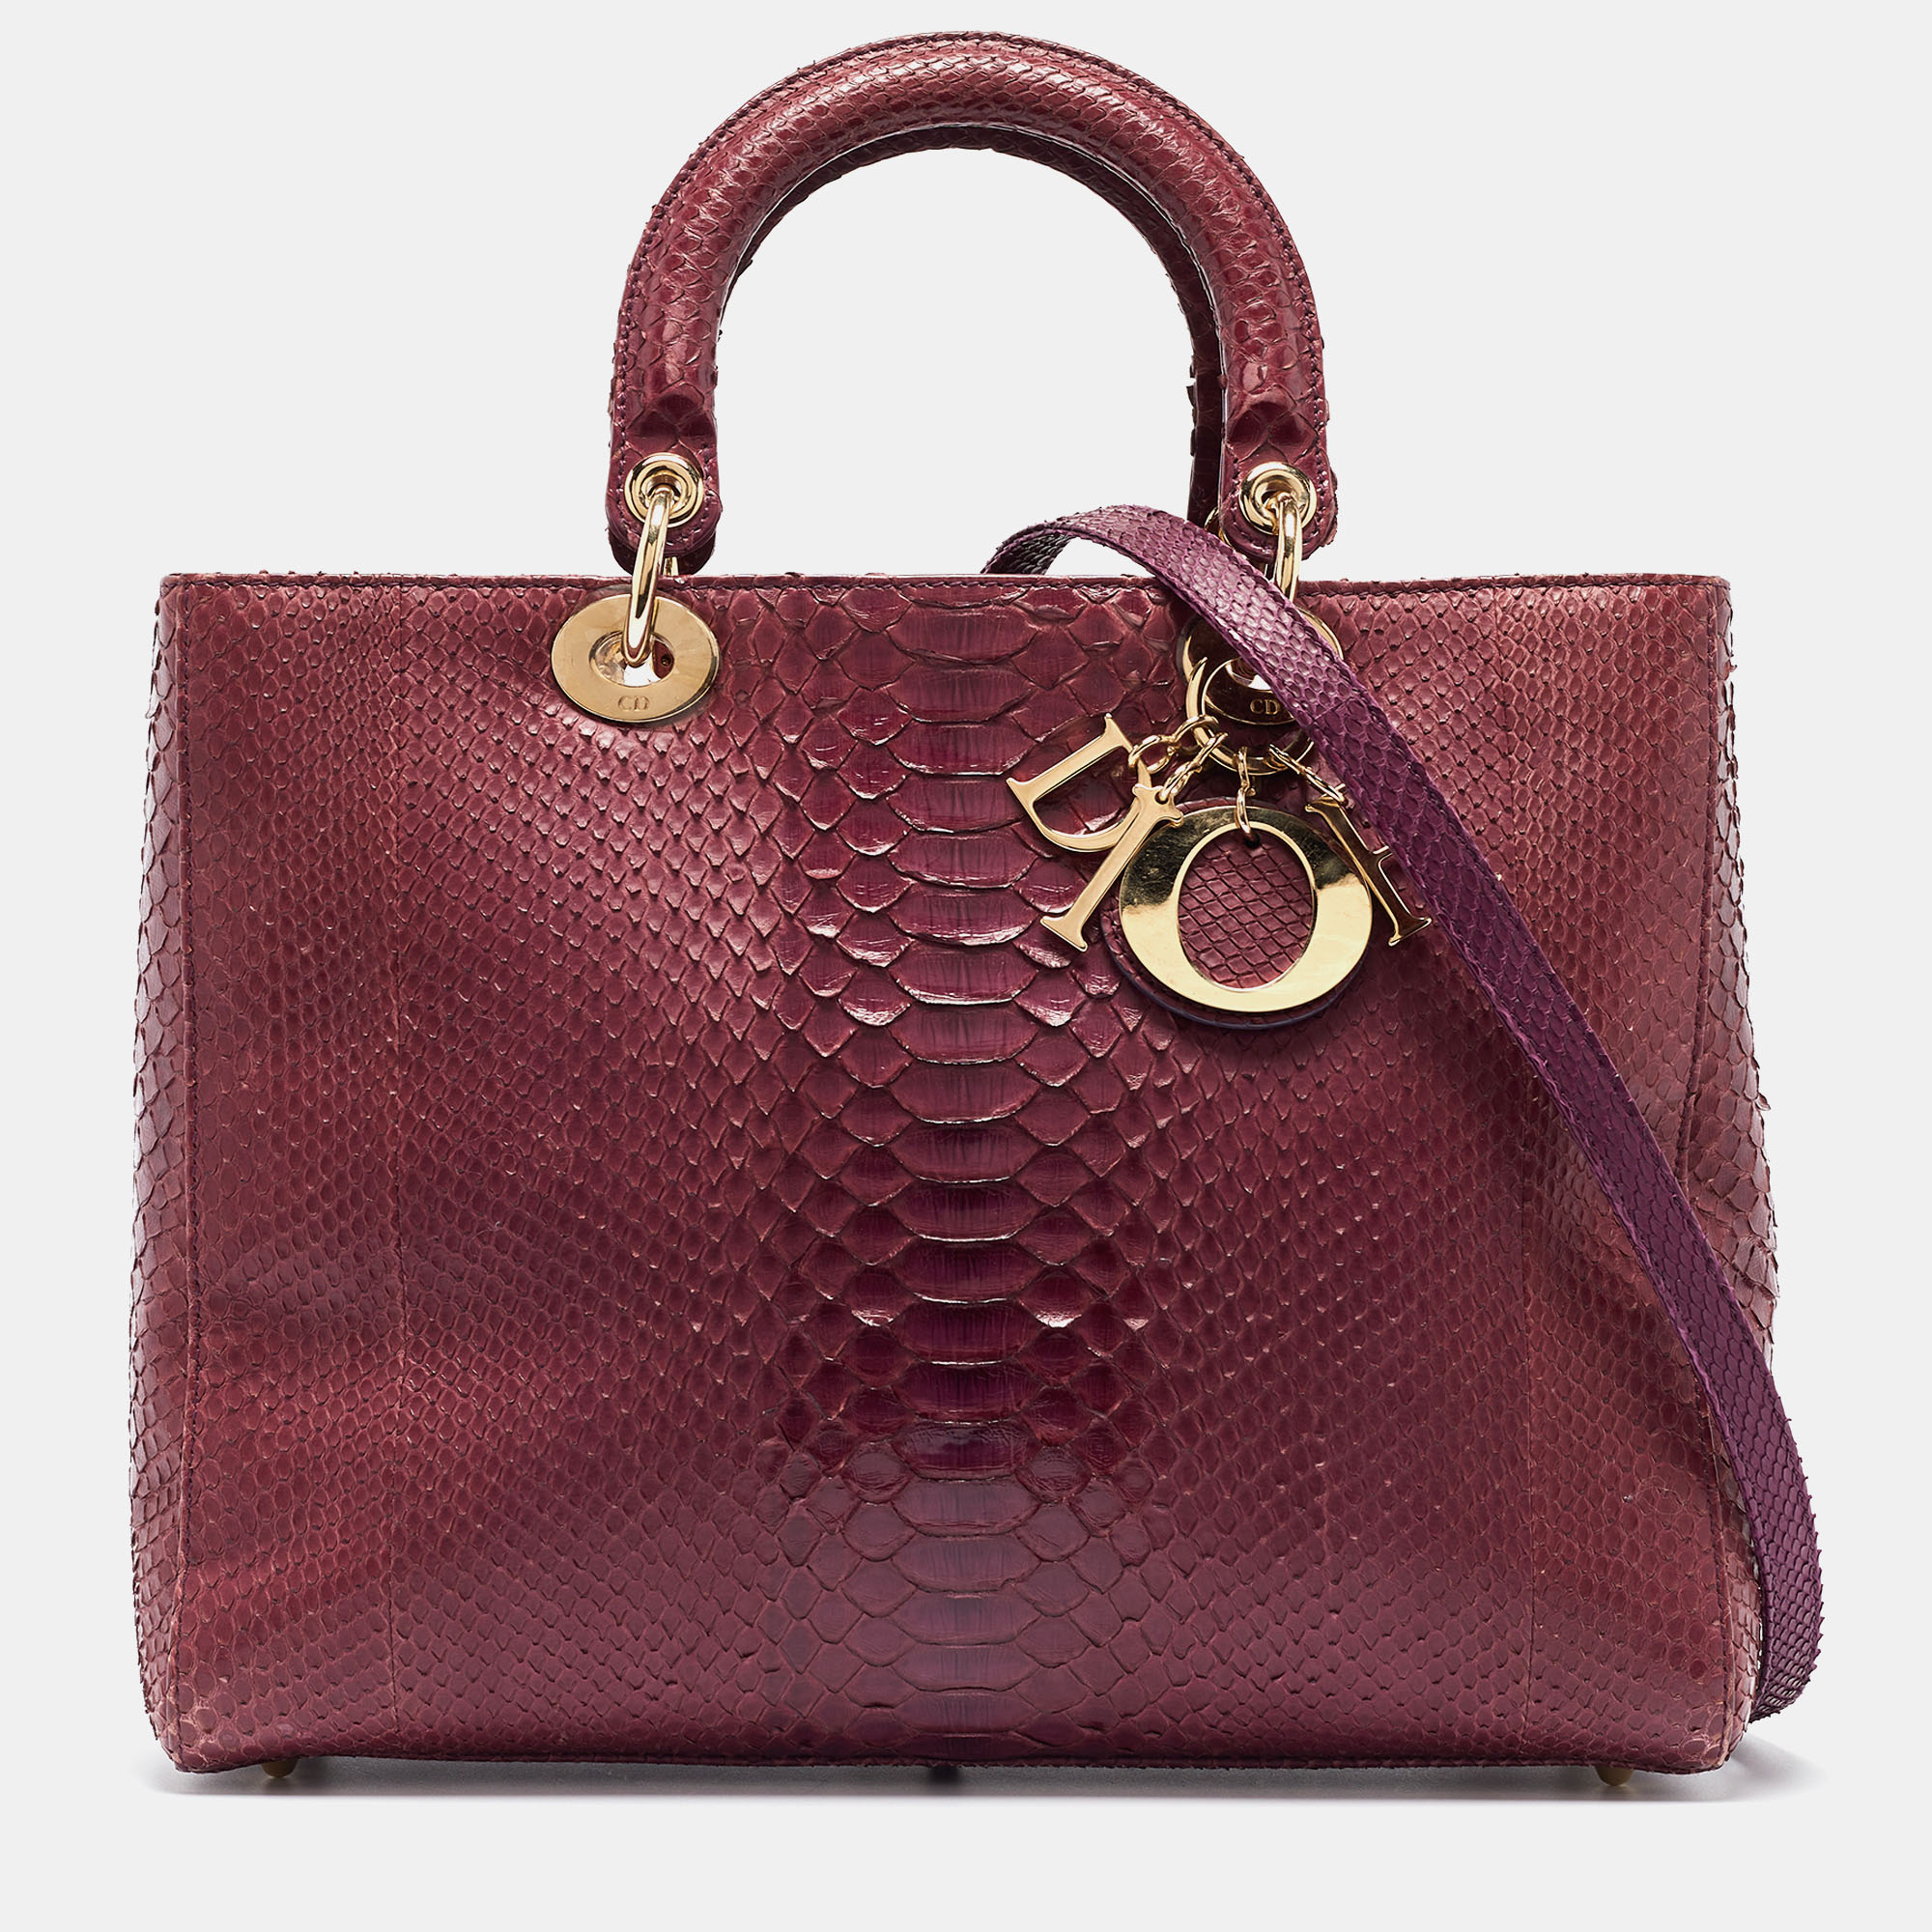 Due to detailed and innovative designs Dior has managed to be at the top of fashions hierarchy through the years. Infuse the signature aesthetics of the brand into your outfit by accessorizing it with this Lady Dior tote. With a classic design it is crafted from purple python skin and the brands letter charms mark its quality craftsmanship. The double handles at the top a shoulder strap and its perfectly sized interior make it a functional companion for your next soiree.